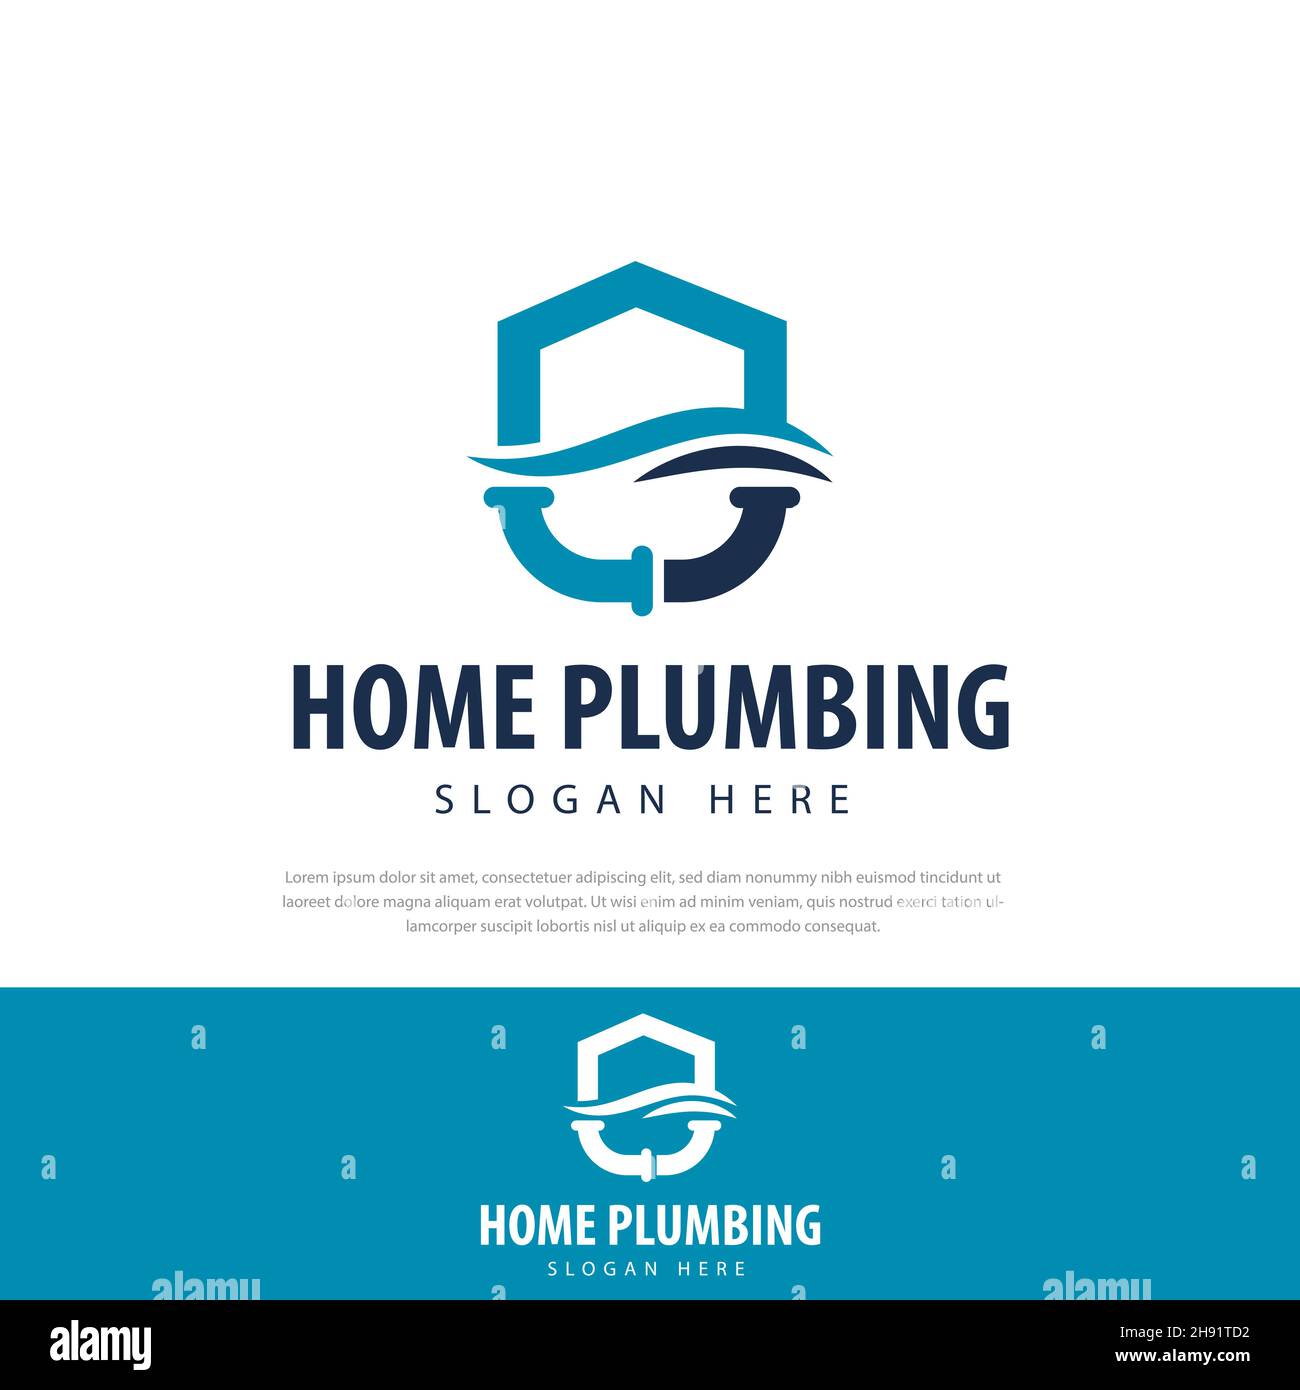 Home plumbing and heating service logo Template Design vector illustration,symbols,icons Stock Vector